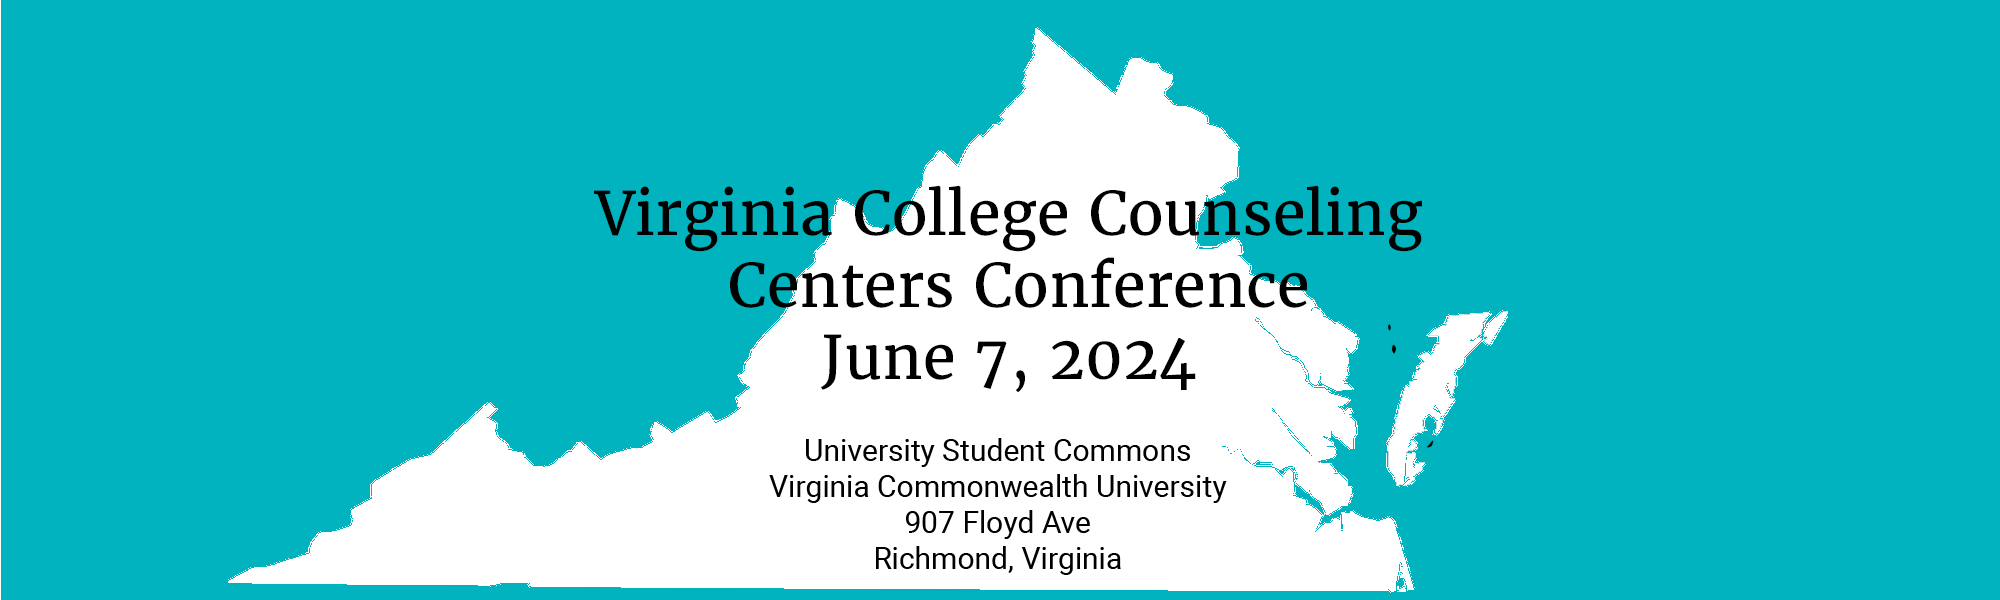 Virginia College Counseling Centers Conference JUNE 7, 2024 University Student Commons 907 Floyd Ave, Richmond, VA 23284 Virginia Commonwealth University